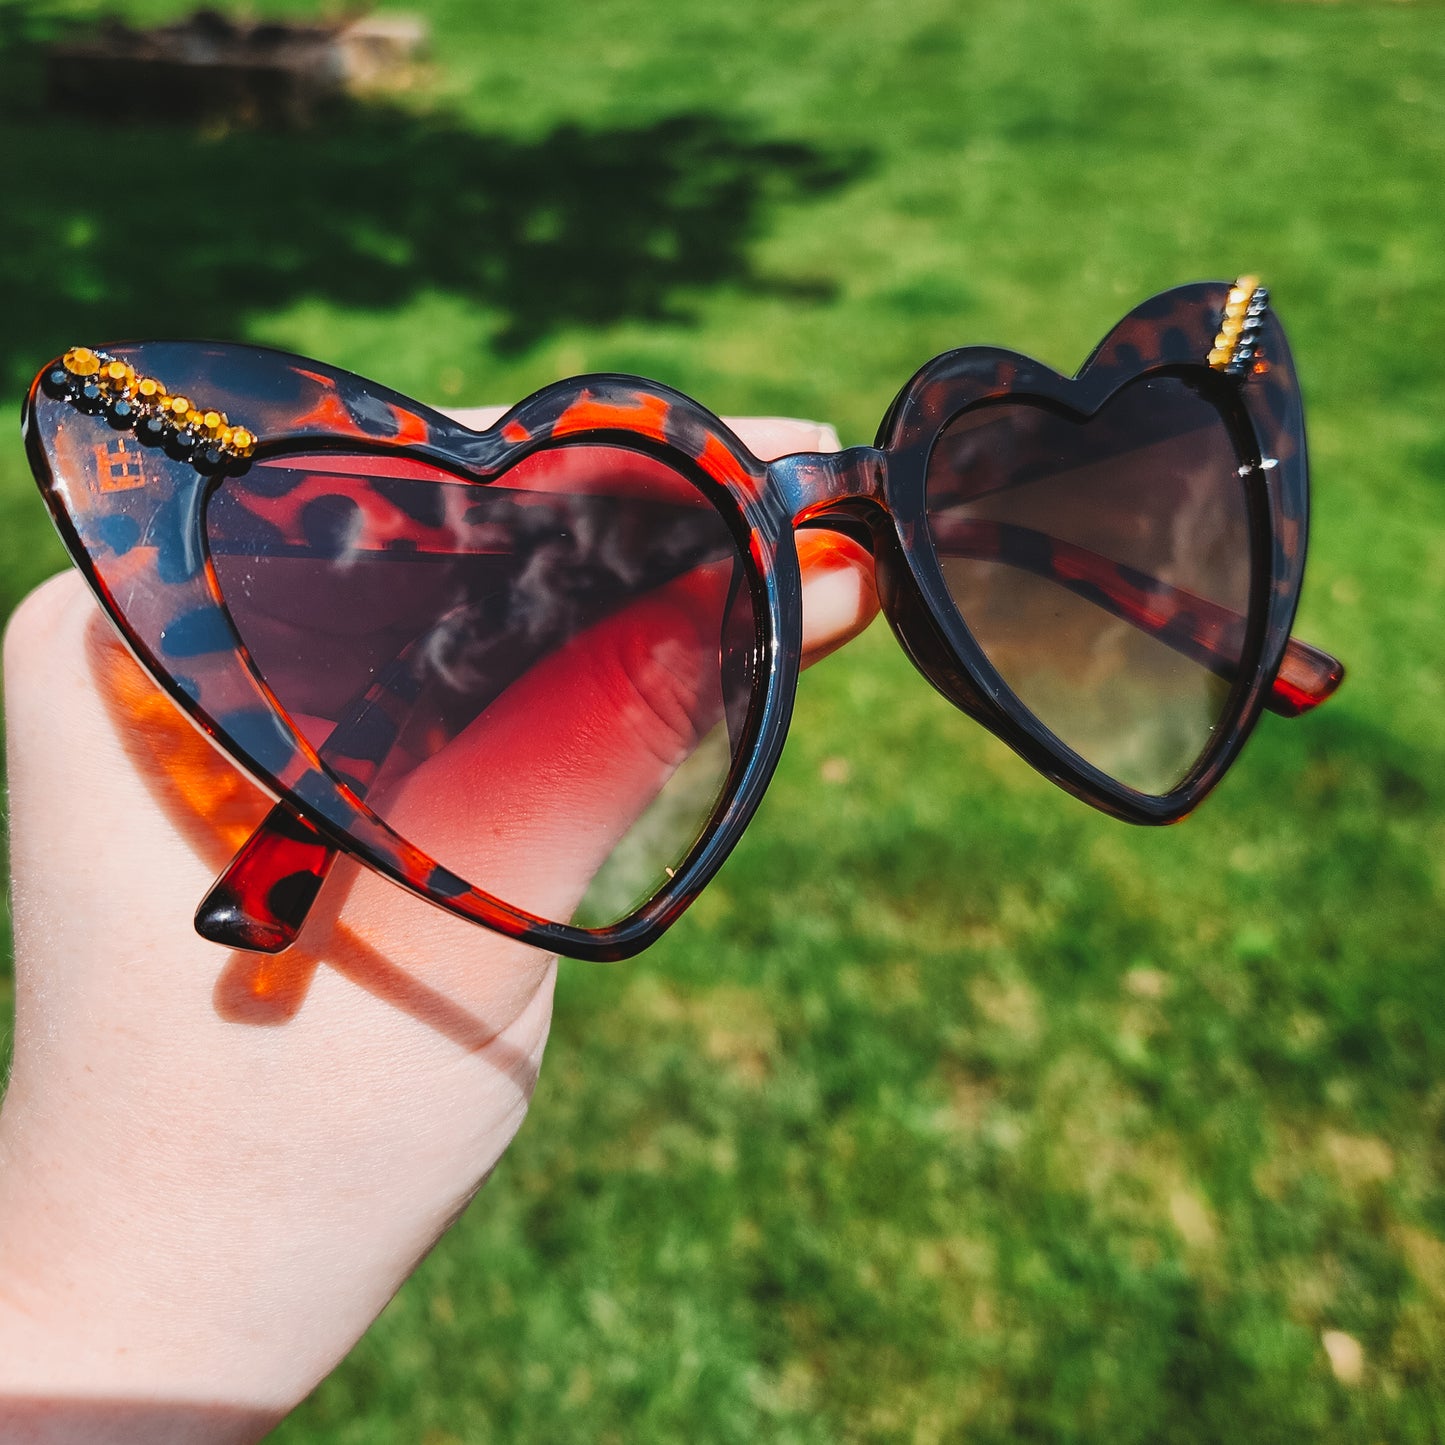 Tortoise Shell Heart Shaped Sunnies with Gold and Black Rhinestone Accent